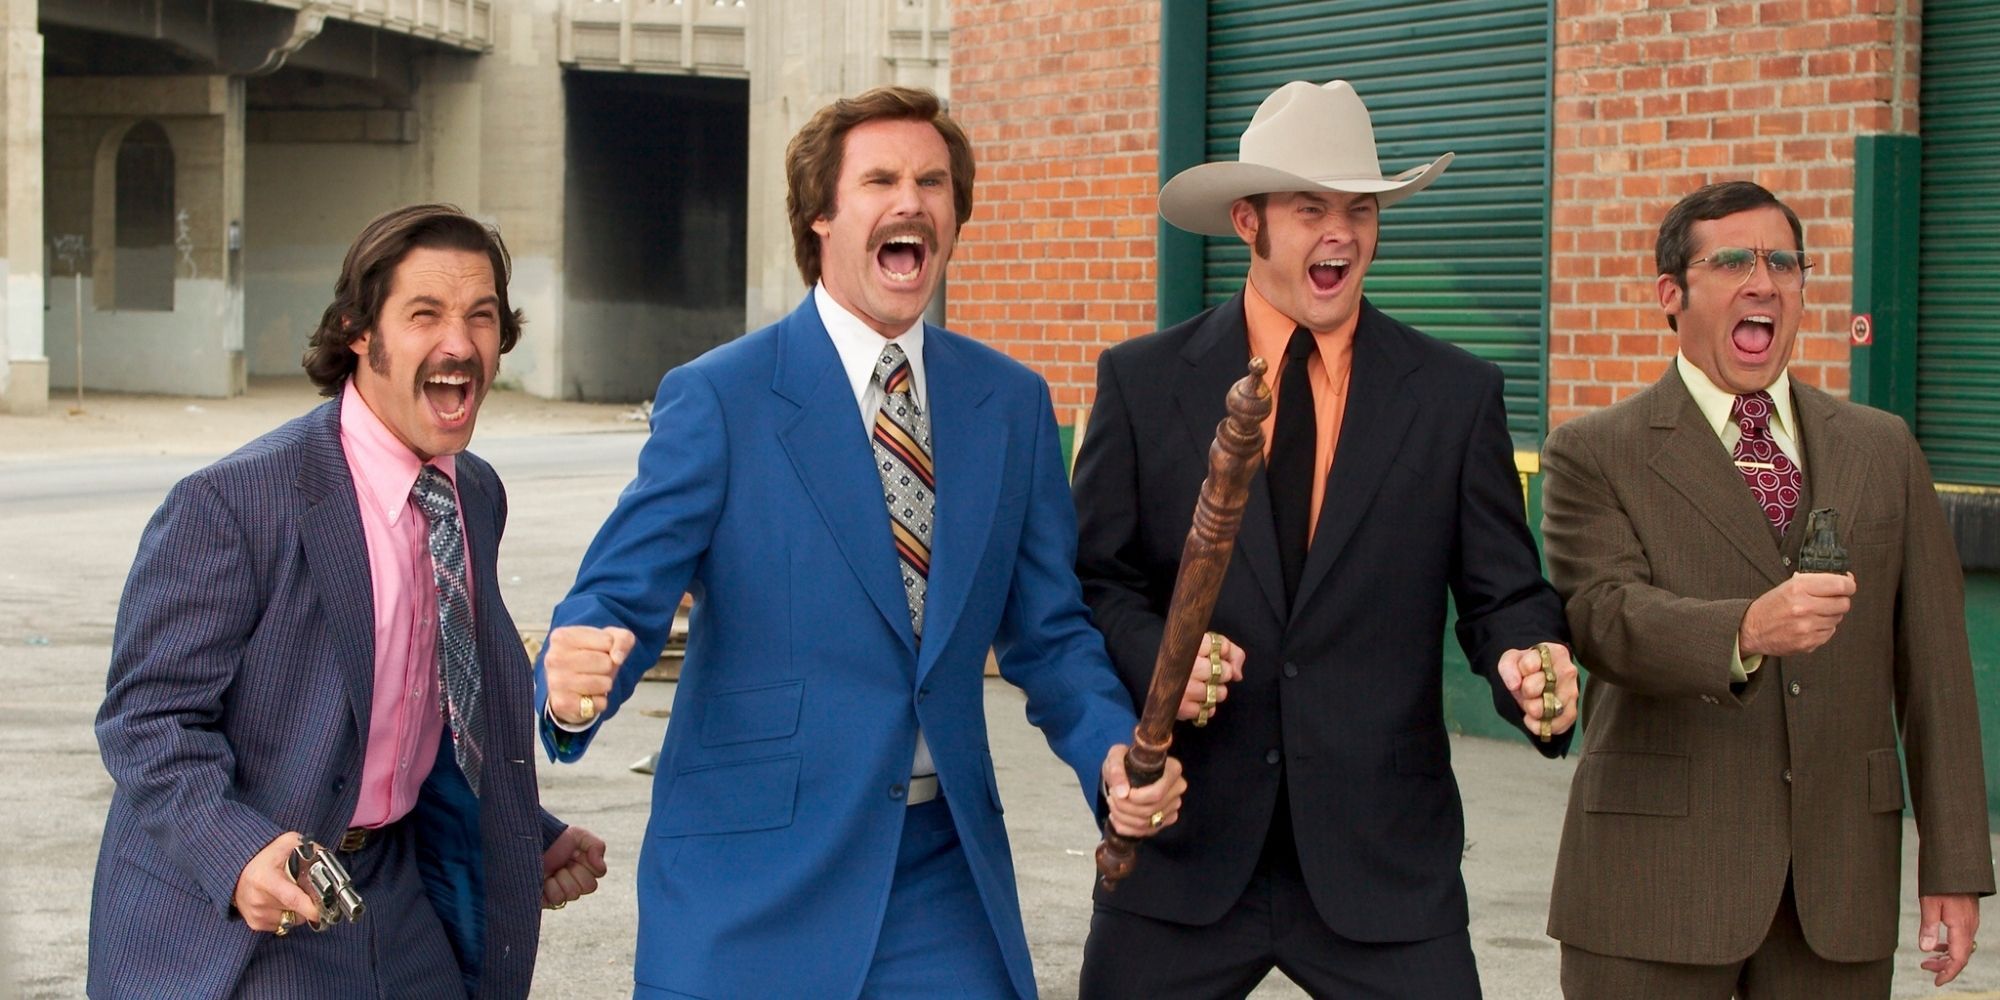 Paul Rudd, Will Ferrell, David Koechner and Steve Carell gear up for battle in Anchorman: The Legend of Ron Burgundy